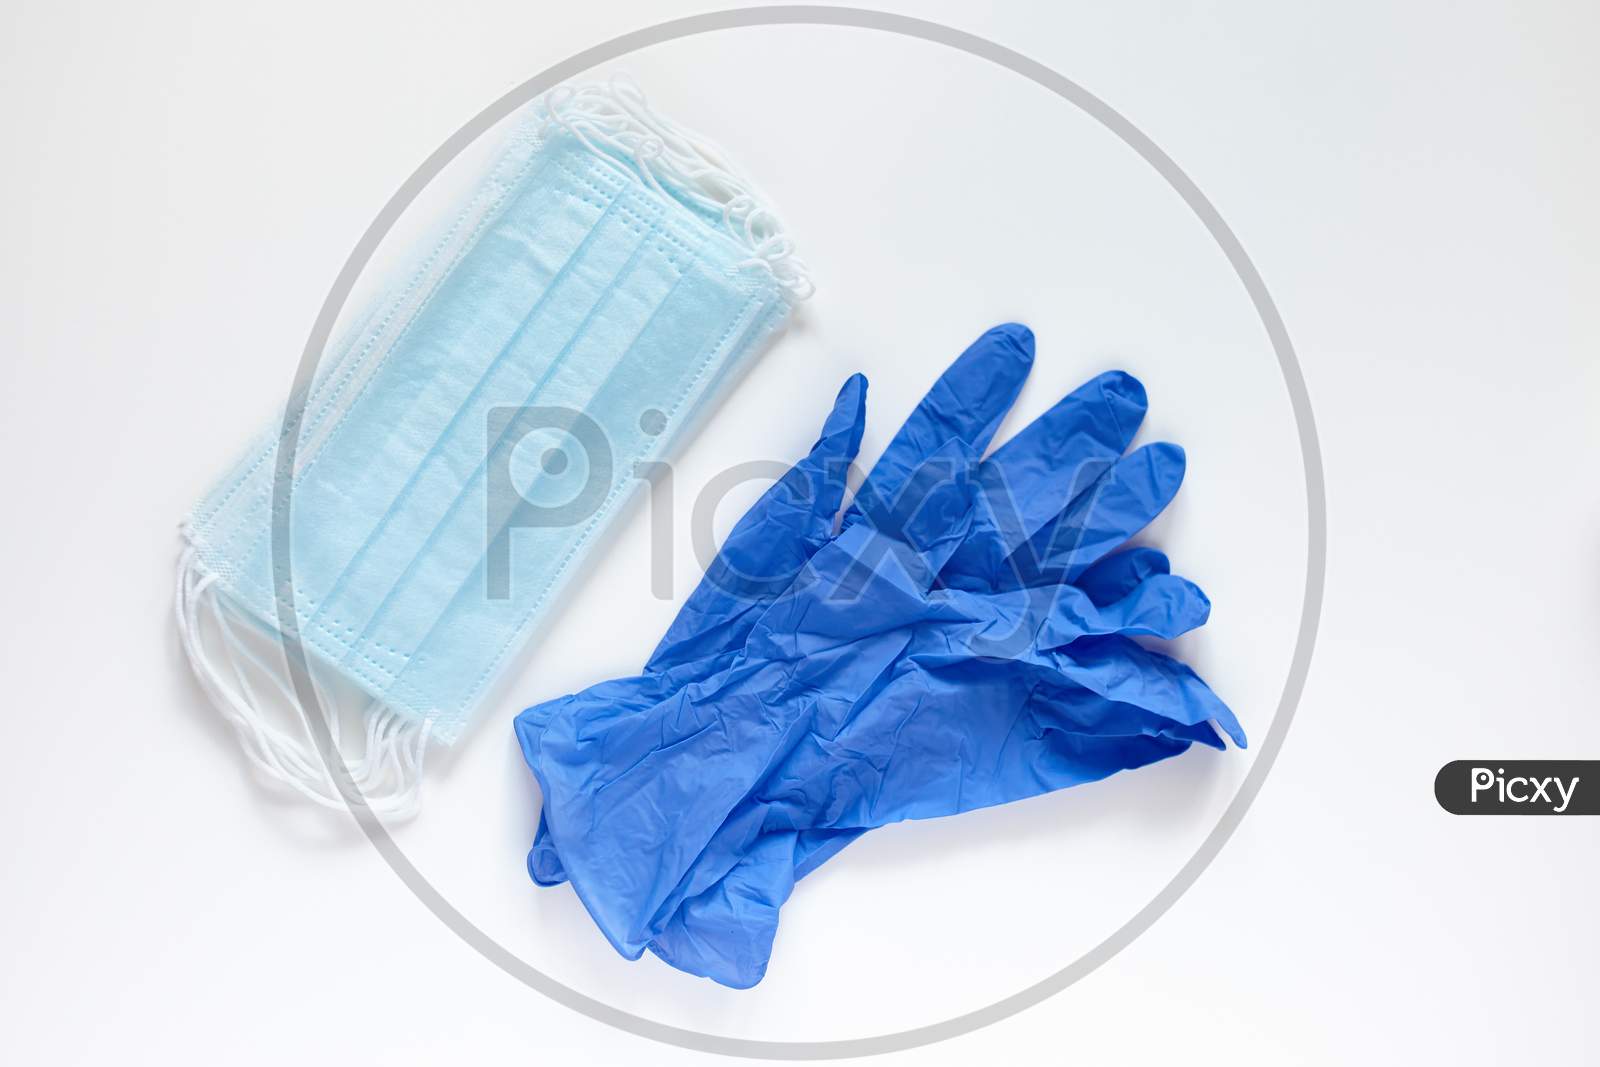 Pair Of Latex Medical Gloves And Surgical Ear-Loop Masks On White Background. Protection Concept. Coronavirus Covid-19 Pandemic.